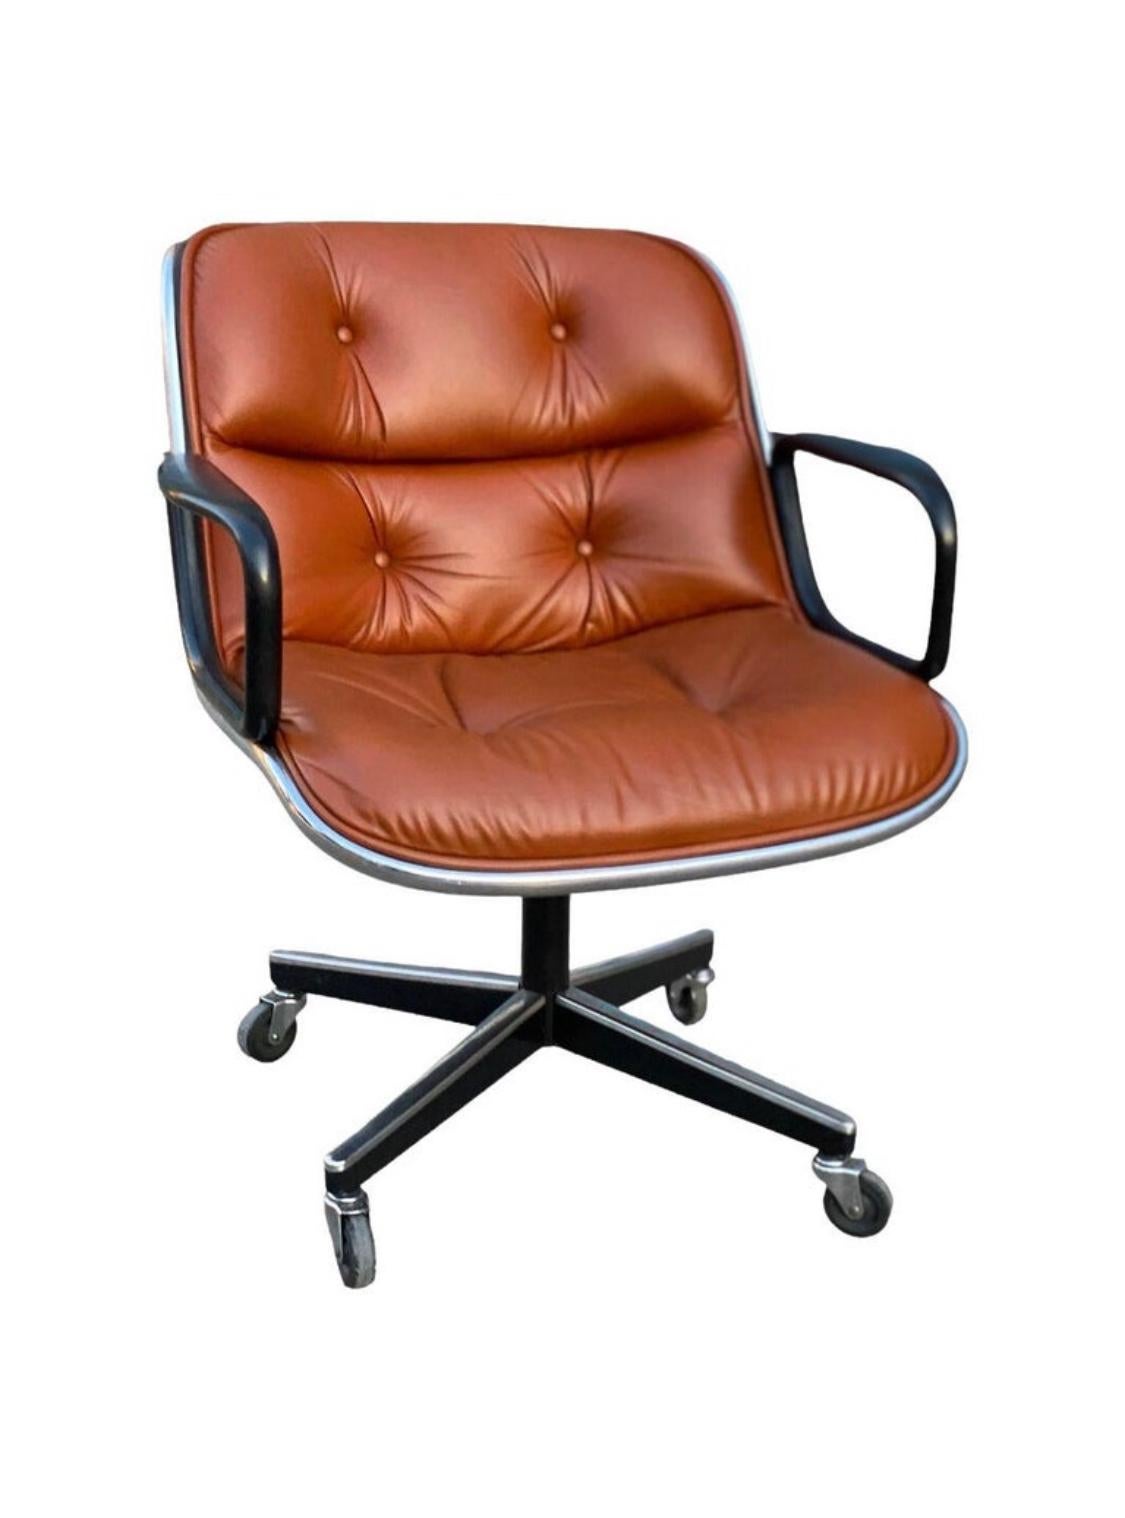 American Charles Pollock Desk Chair by Knoll in Burnt Orange For Sale